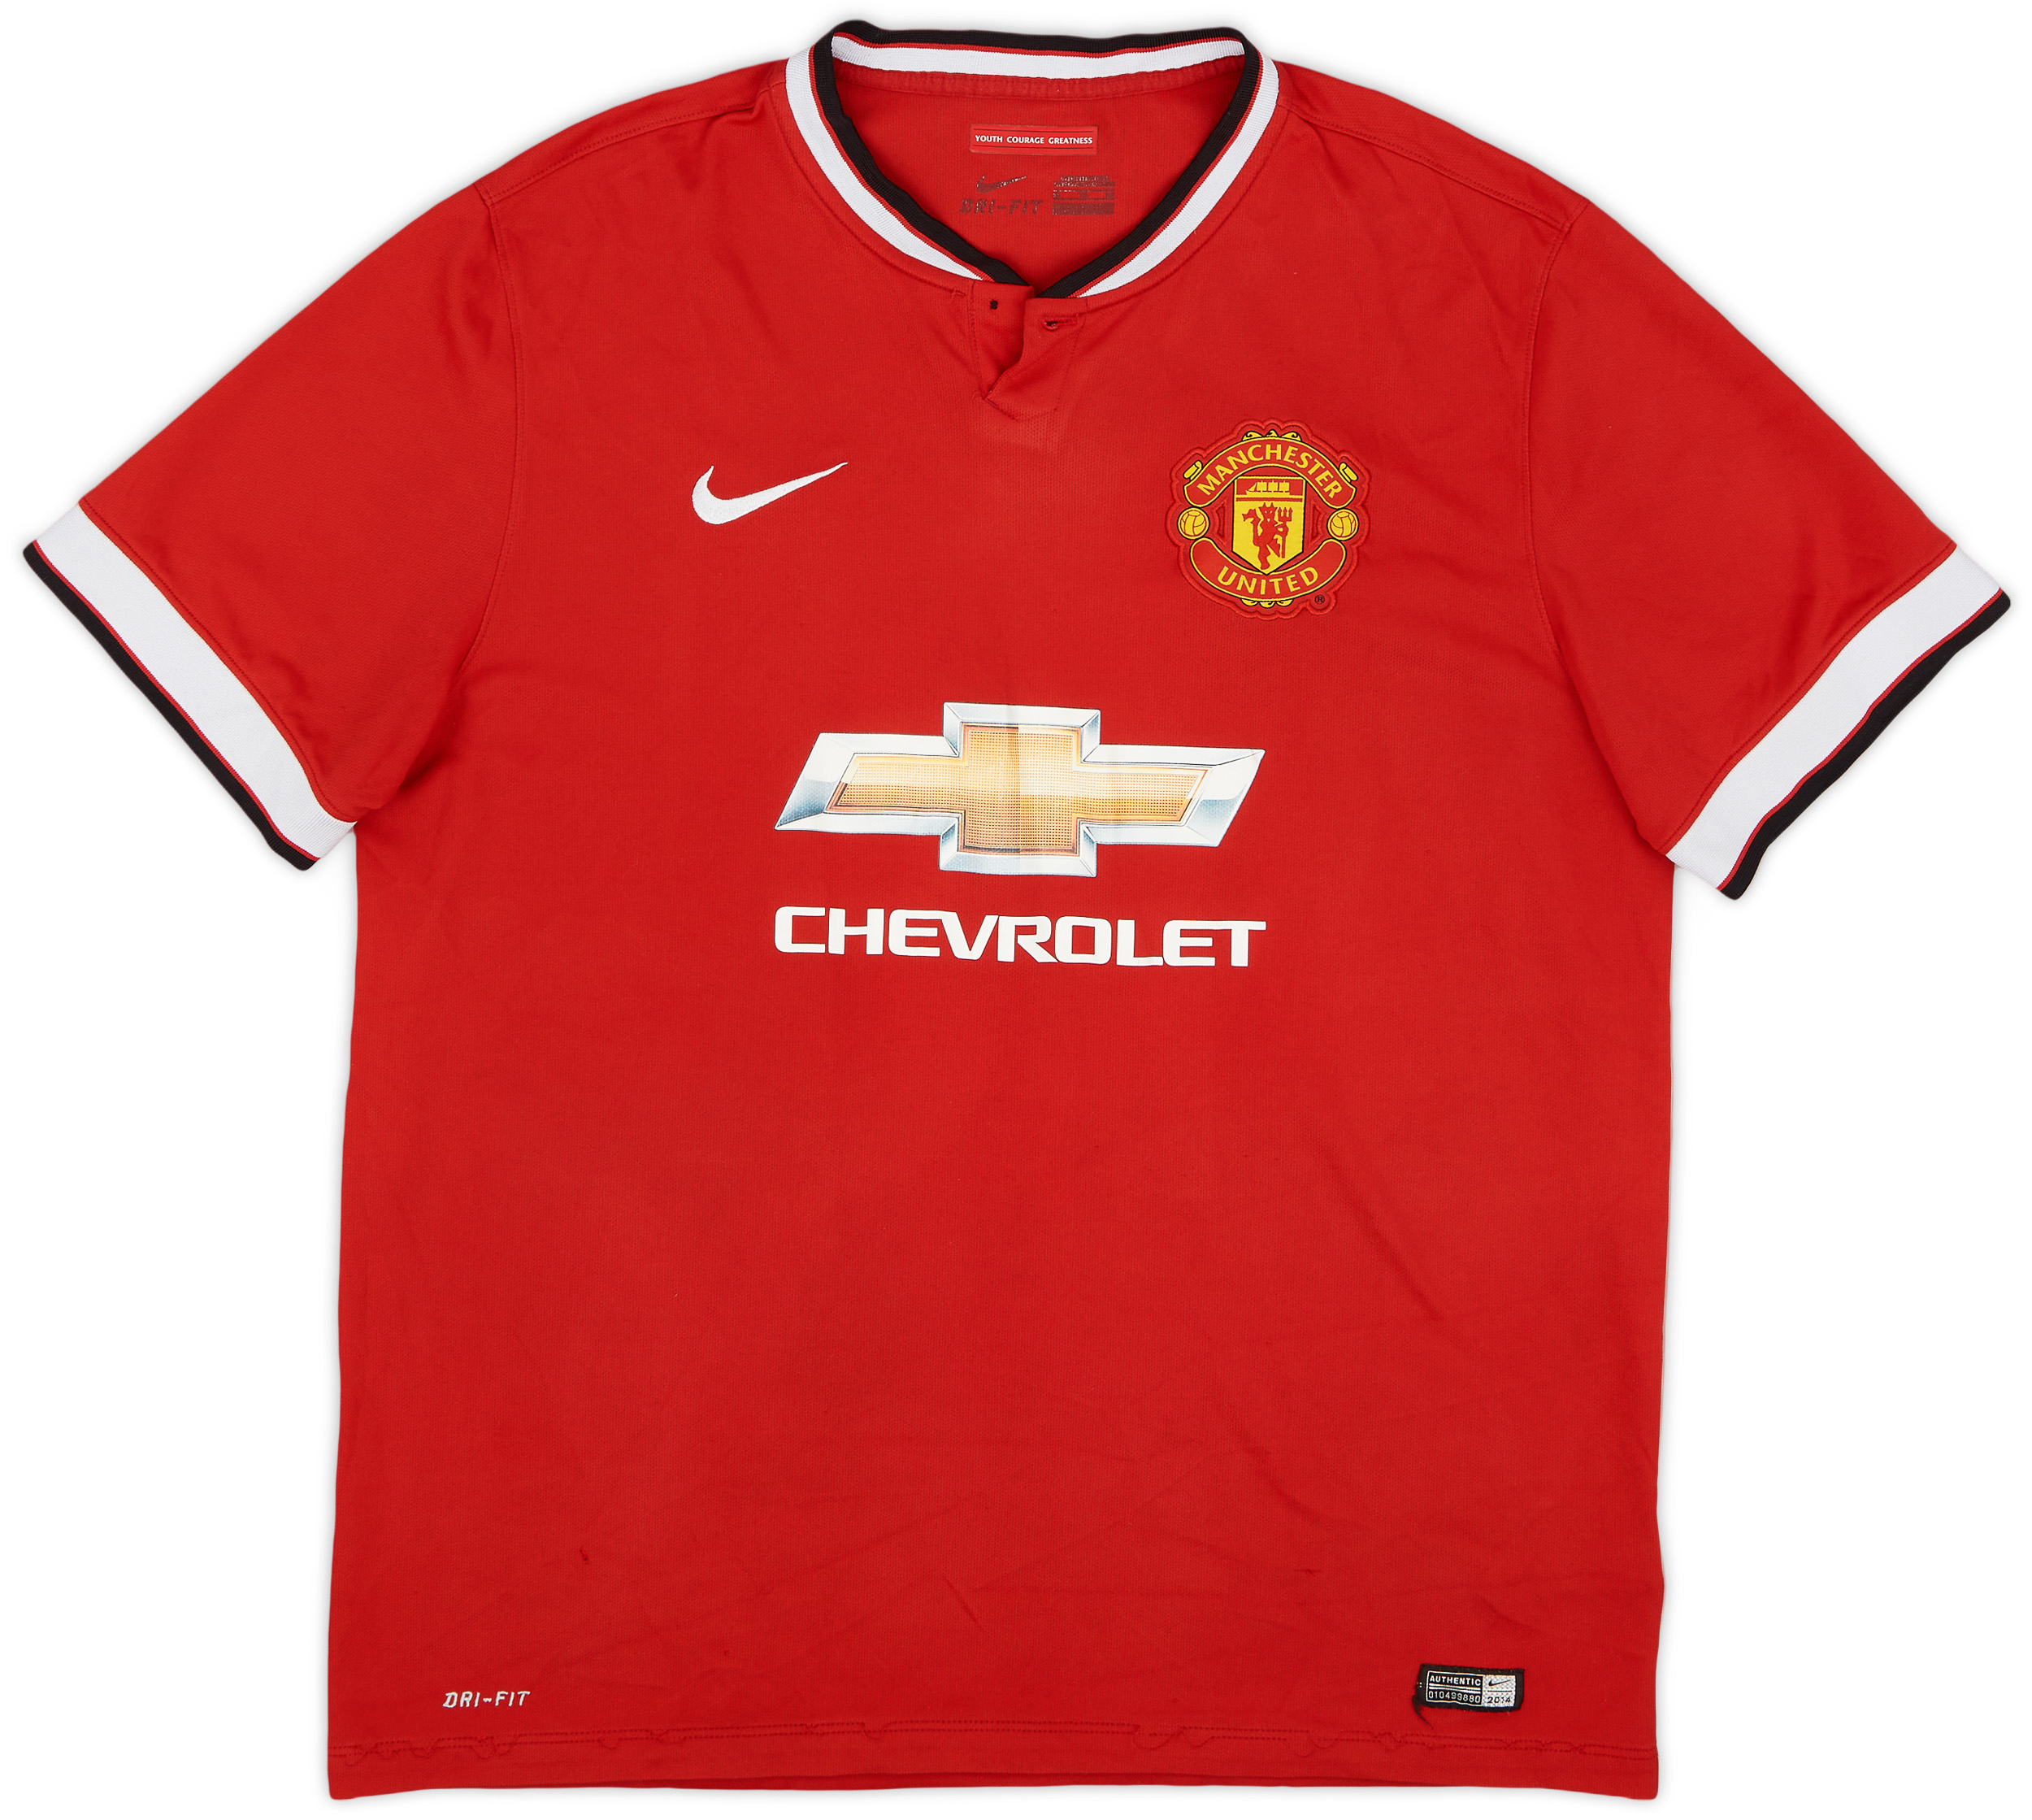 2014-15 Manchester United Home Shirt - 5/10 - ()